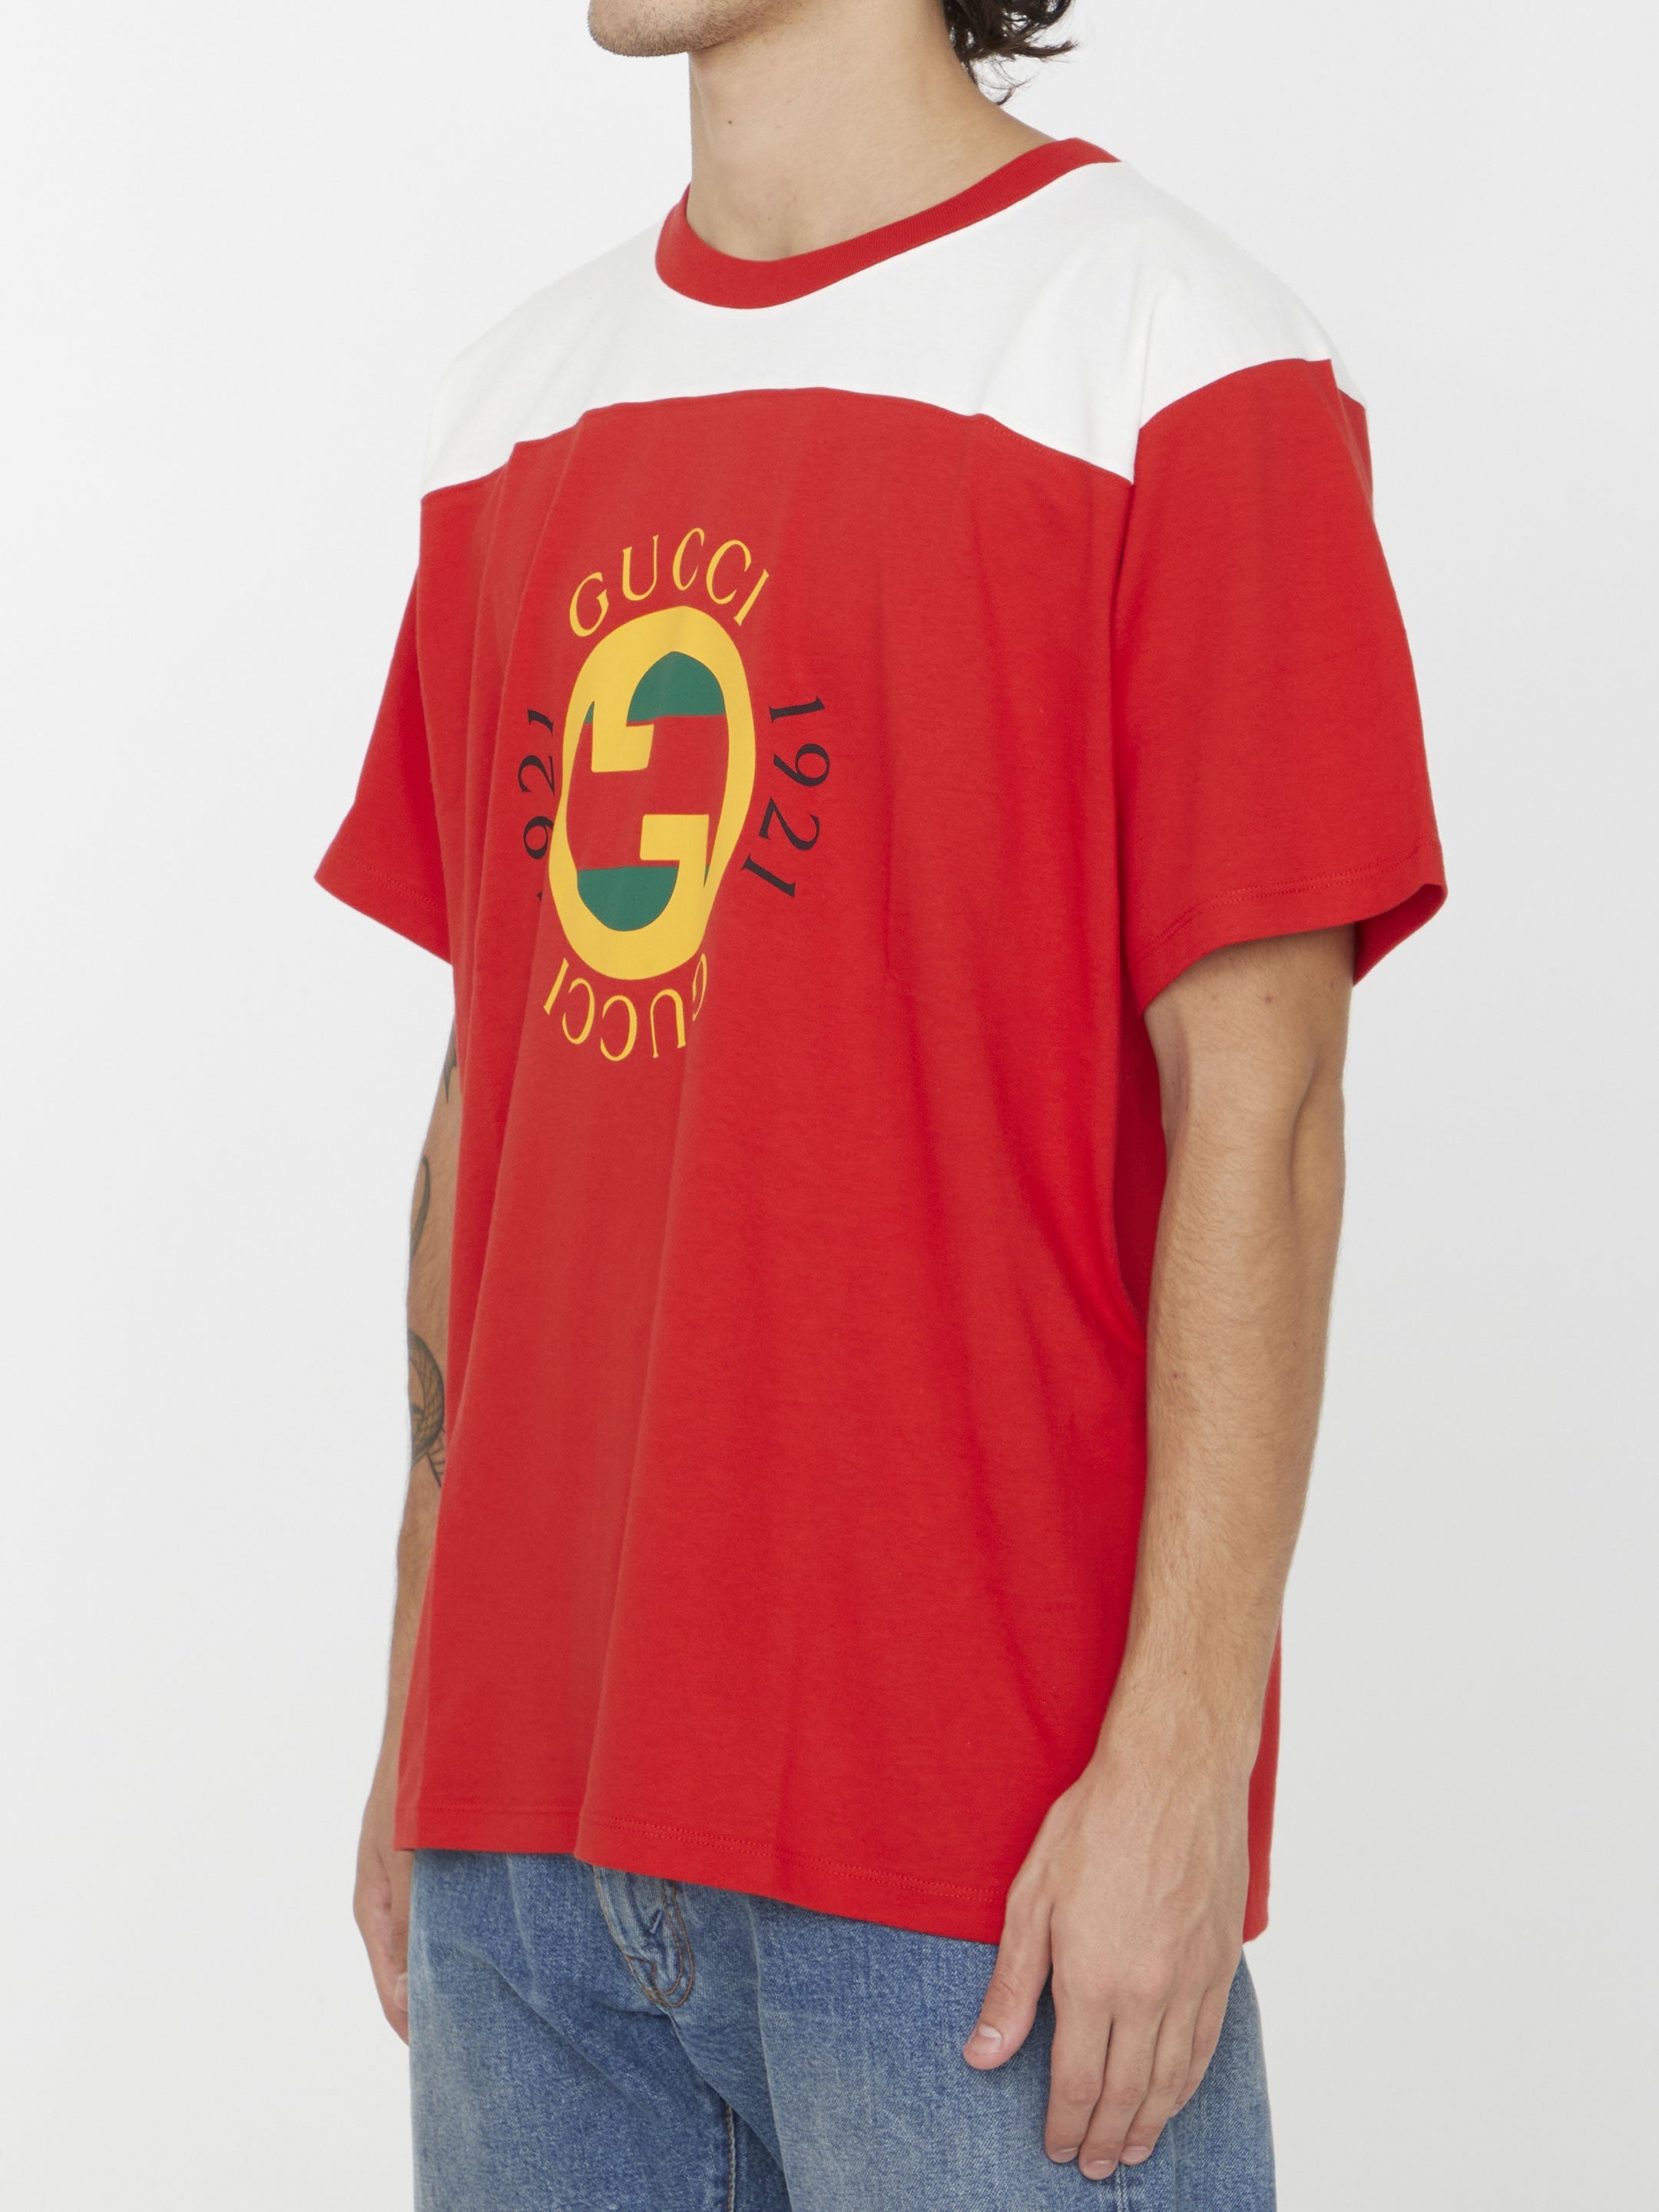 GUCCI-OUTLET-SALE-Cotton-jersey-t-shirt-Shirts-M-RED-ARCHIVE-COLLECTION-2.jpg